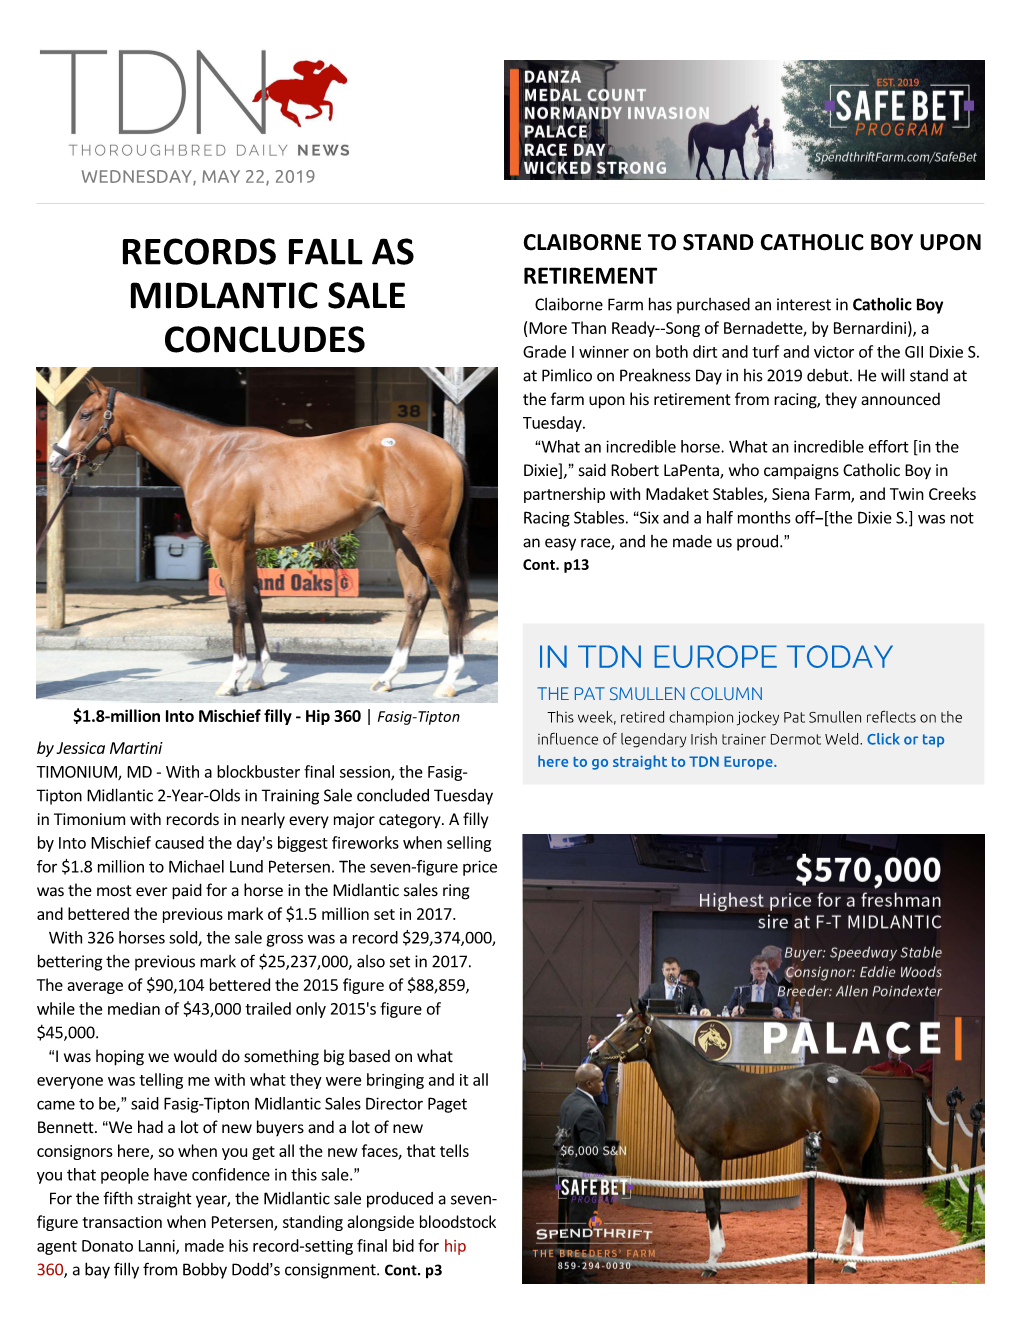 Records Fall As Midlantic Sale Concludes